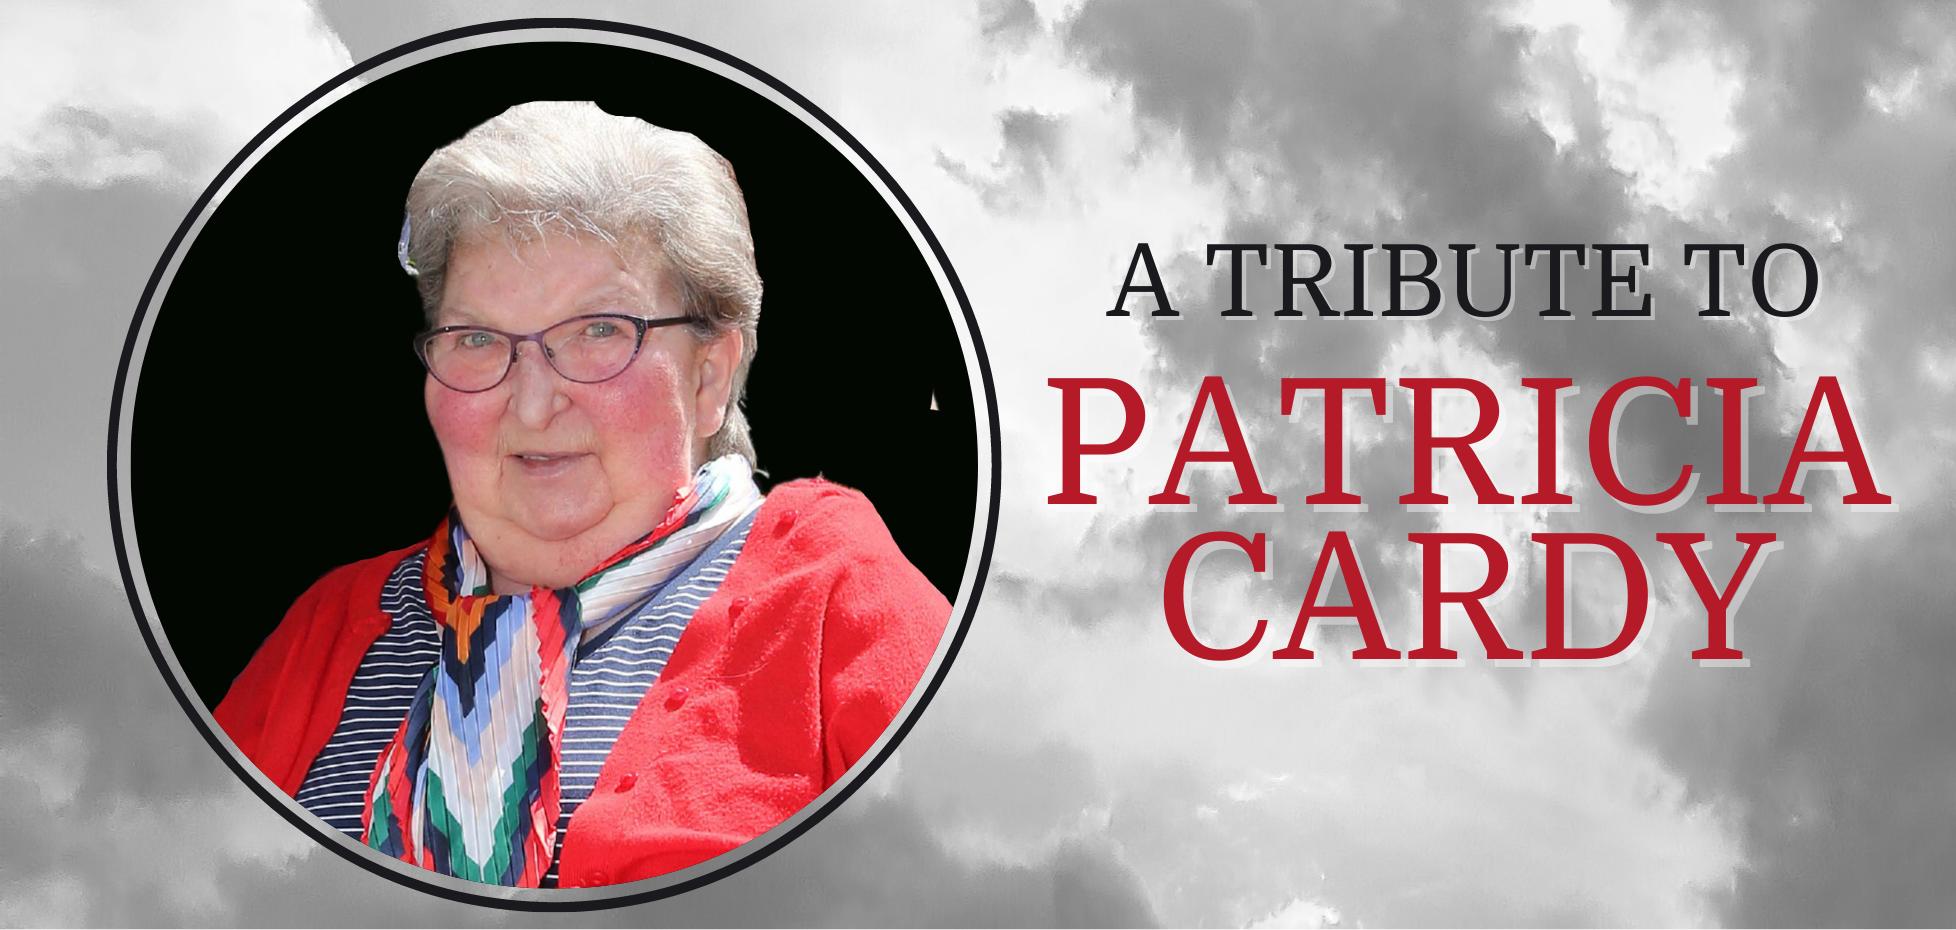 A Tribute to Patricia Cardy